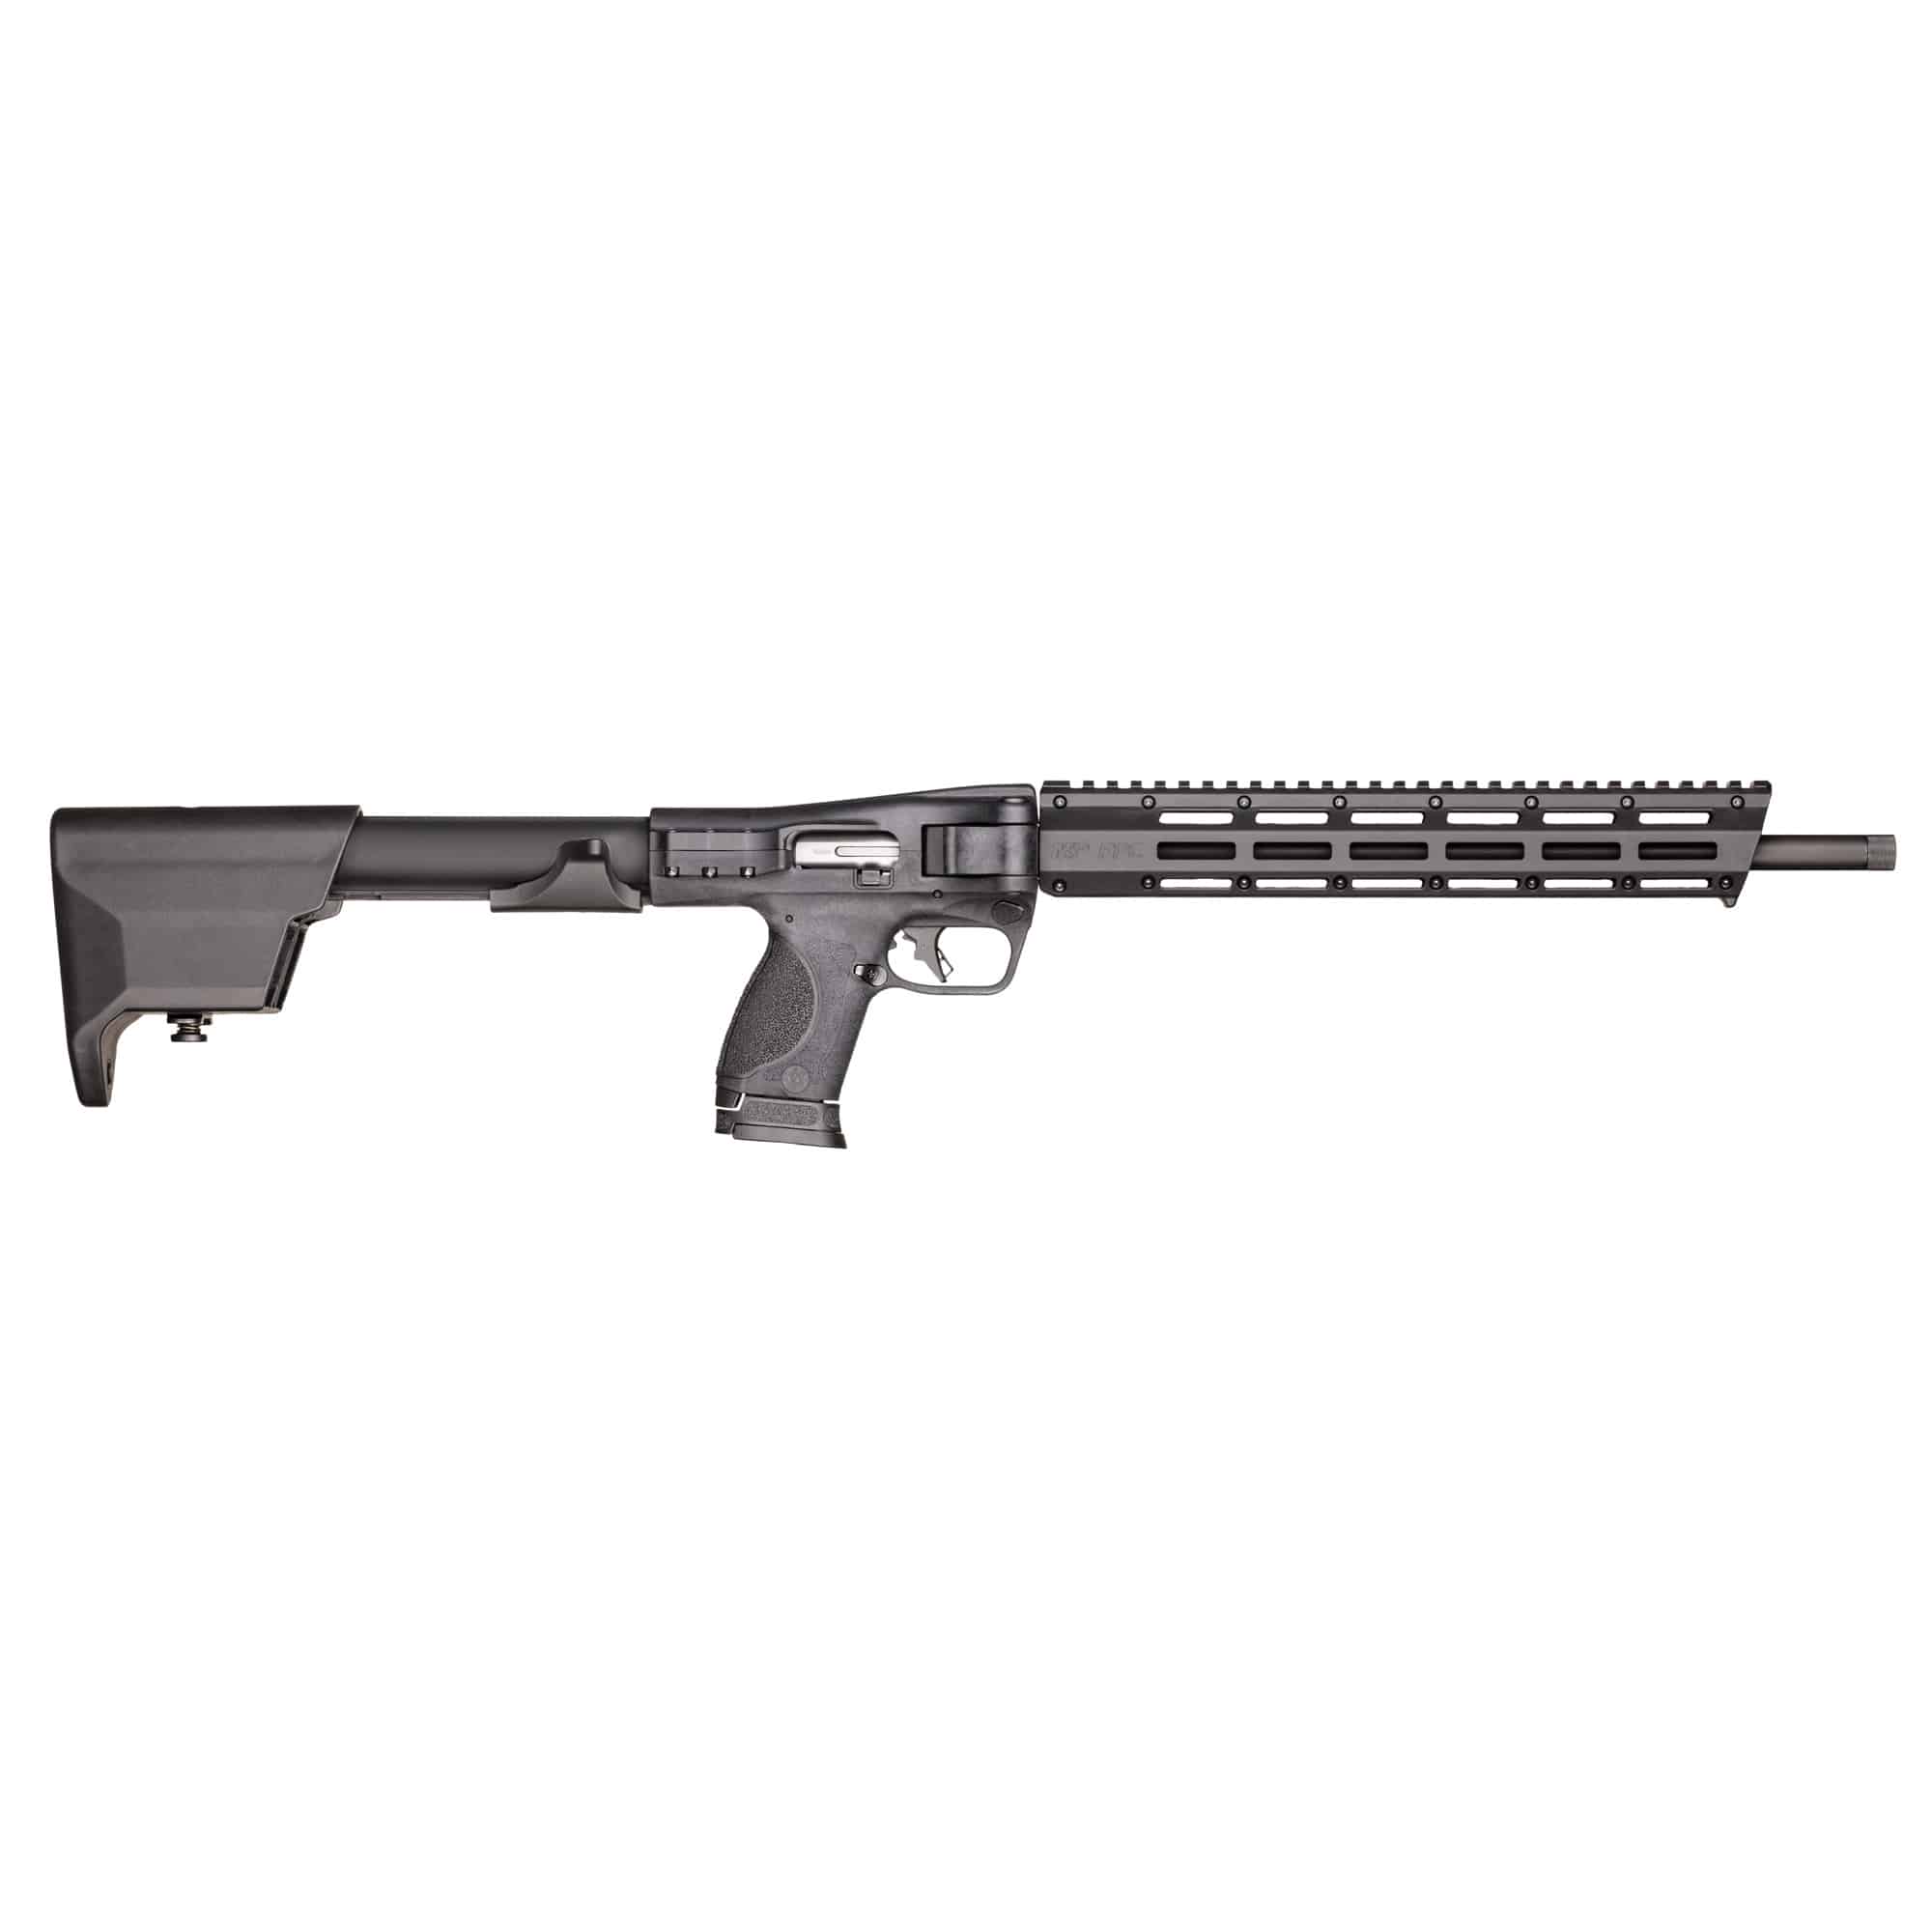 https://cityarsenal.com/product/smith-wesson-mp-fpc-9mm-carbine-rifle-12575/